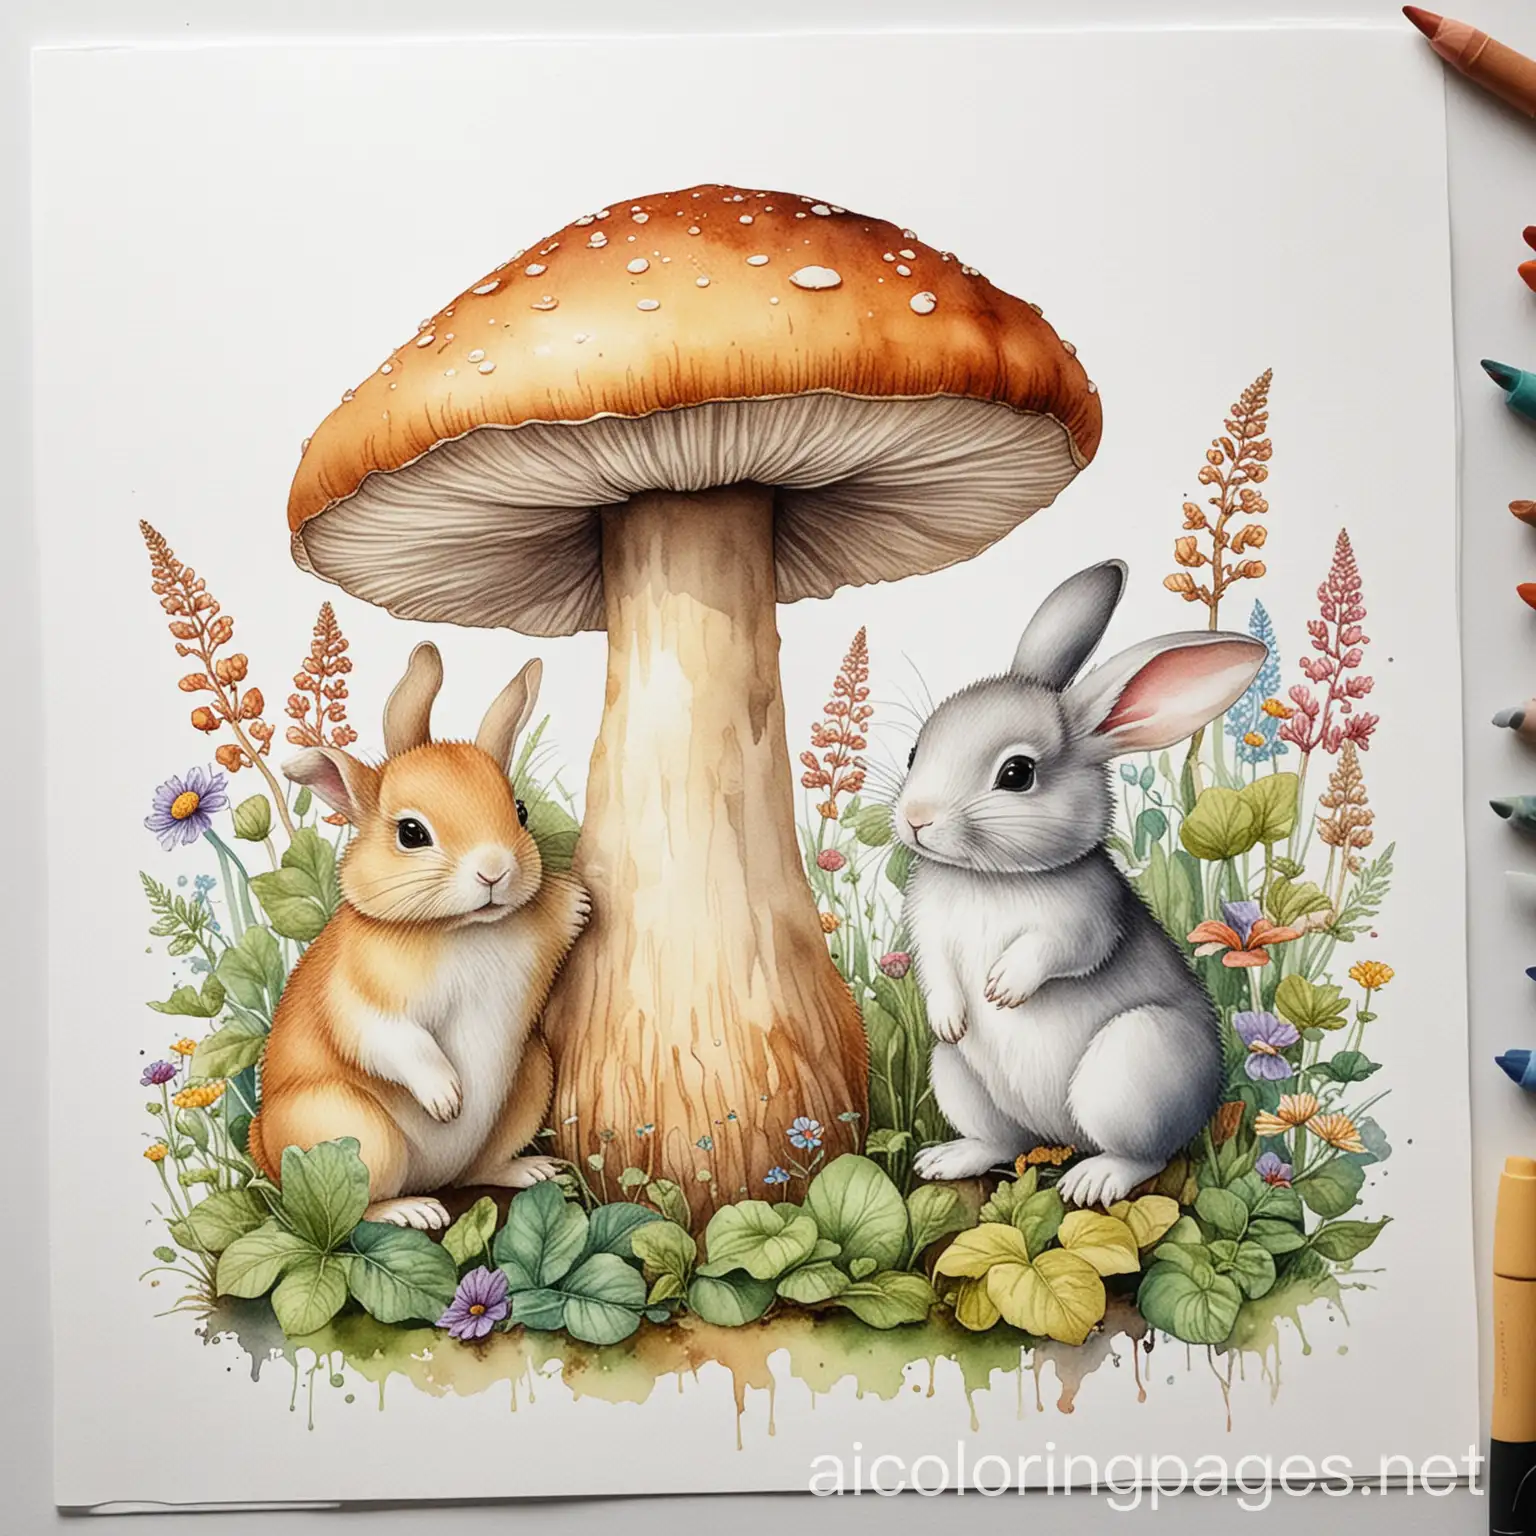 Vintage-Mushroom-and-Bunny-Watercolor-Coloring-Page-Simple-Line-Art-for-Kids